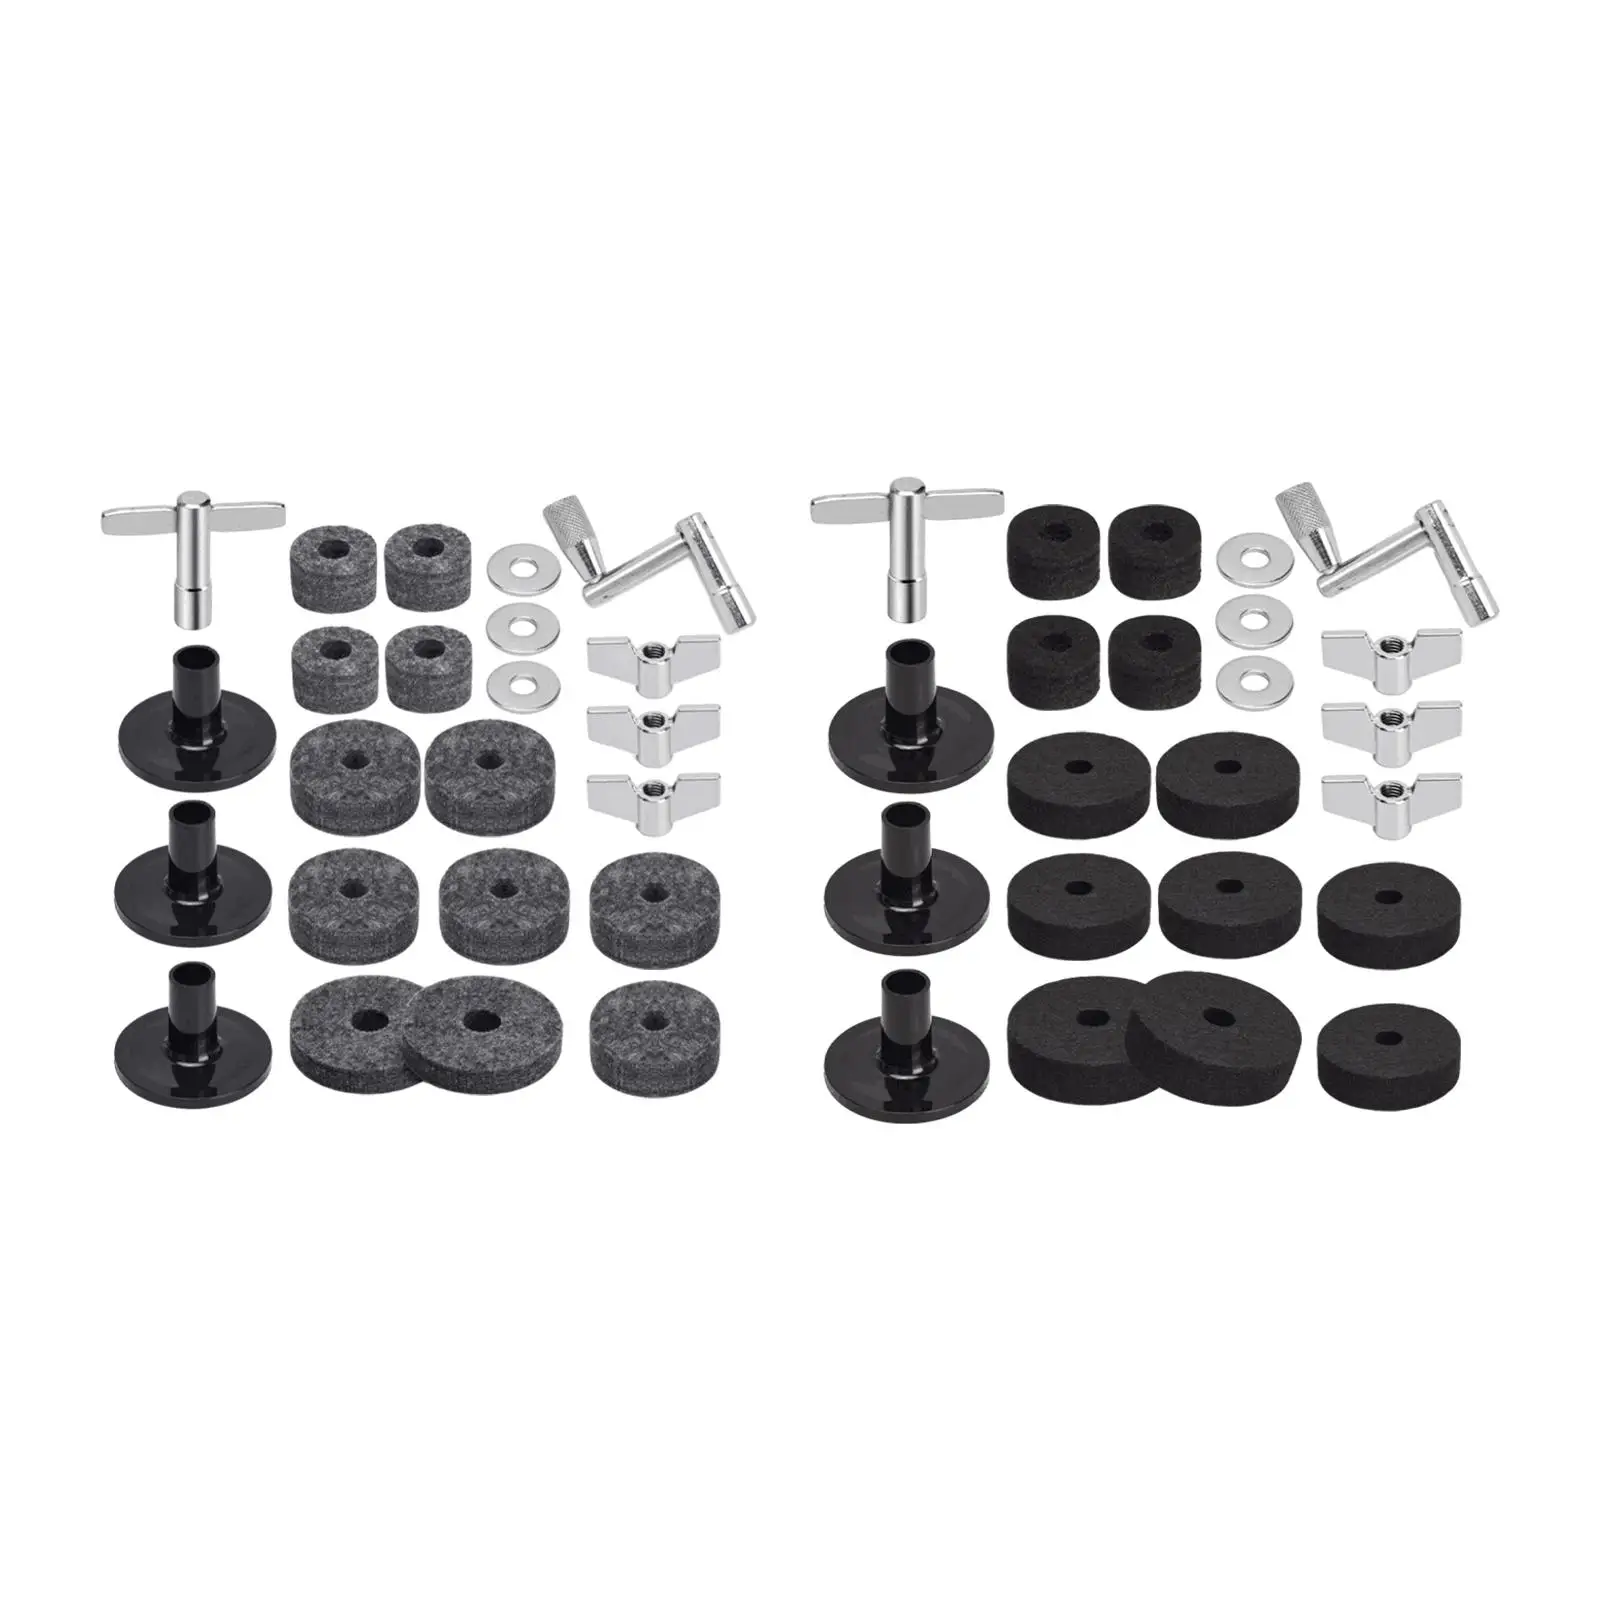 23x Cymbal Replacement Accessories, High Hat Clutch Cup Felt Portable Percussion Instrument Parts Washers Cymbal Support